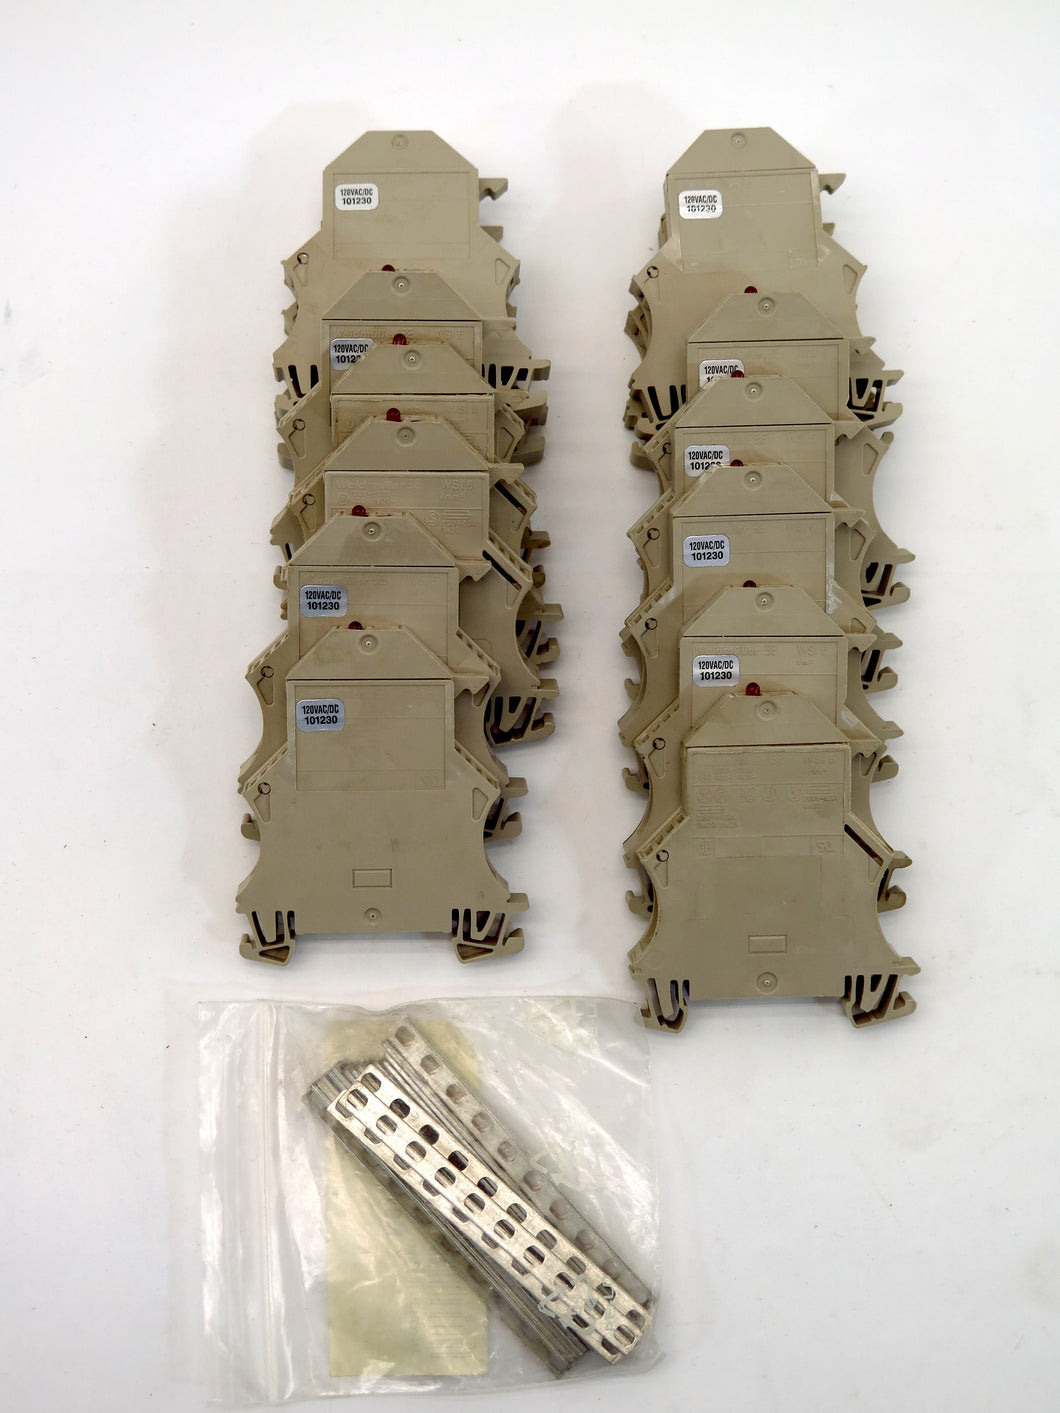 Weidmuller WSI 6 Rail Mount Fuse Terminal (Lot of 14) - Advance Operations